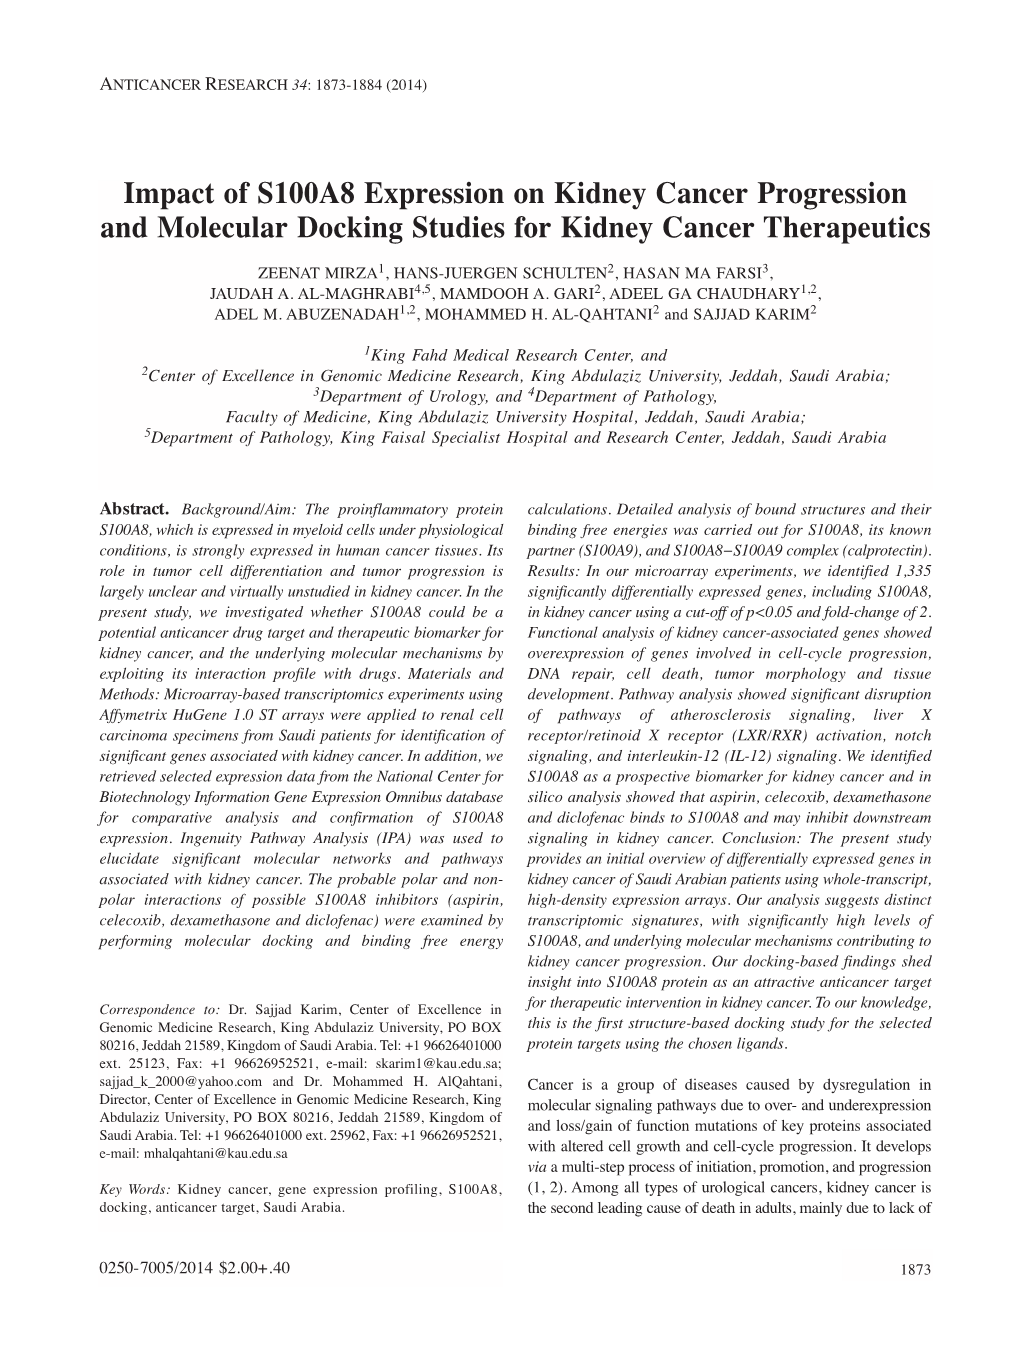 Impact of S100A8 Expression on Kidney Cancer Progression and Molecular Docking Studies for Kidney Cancer Therapeutics